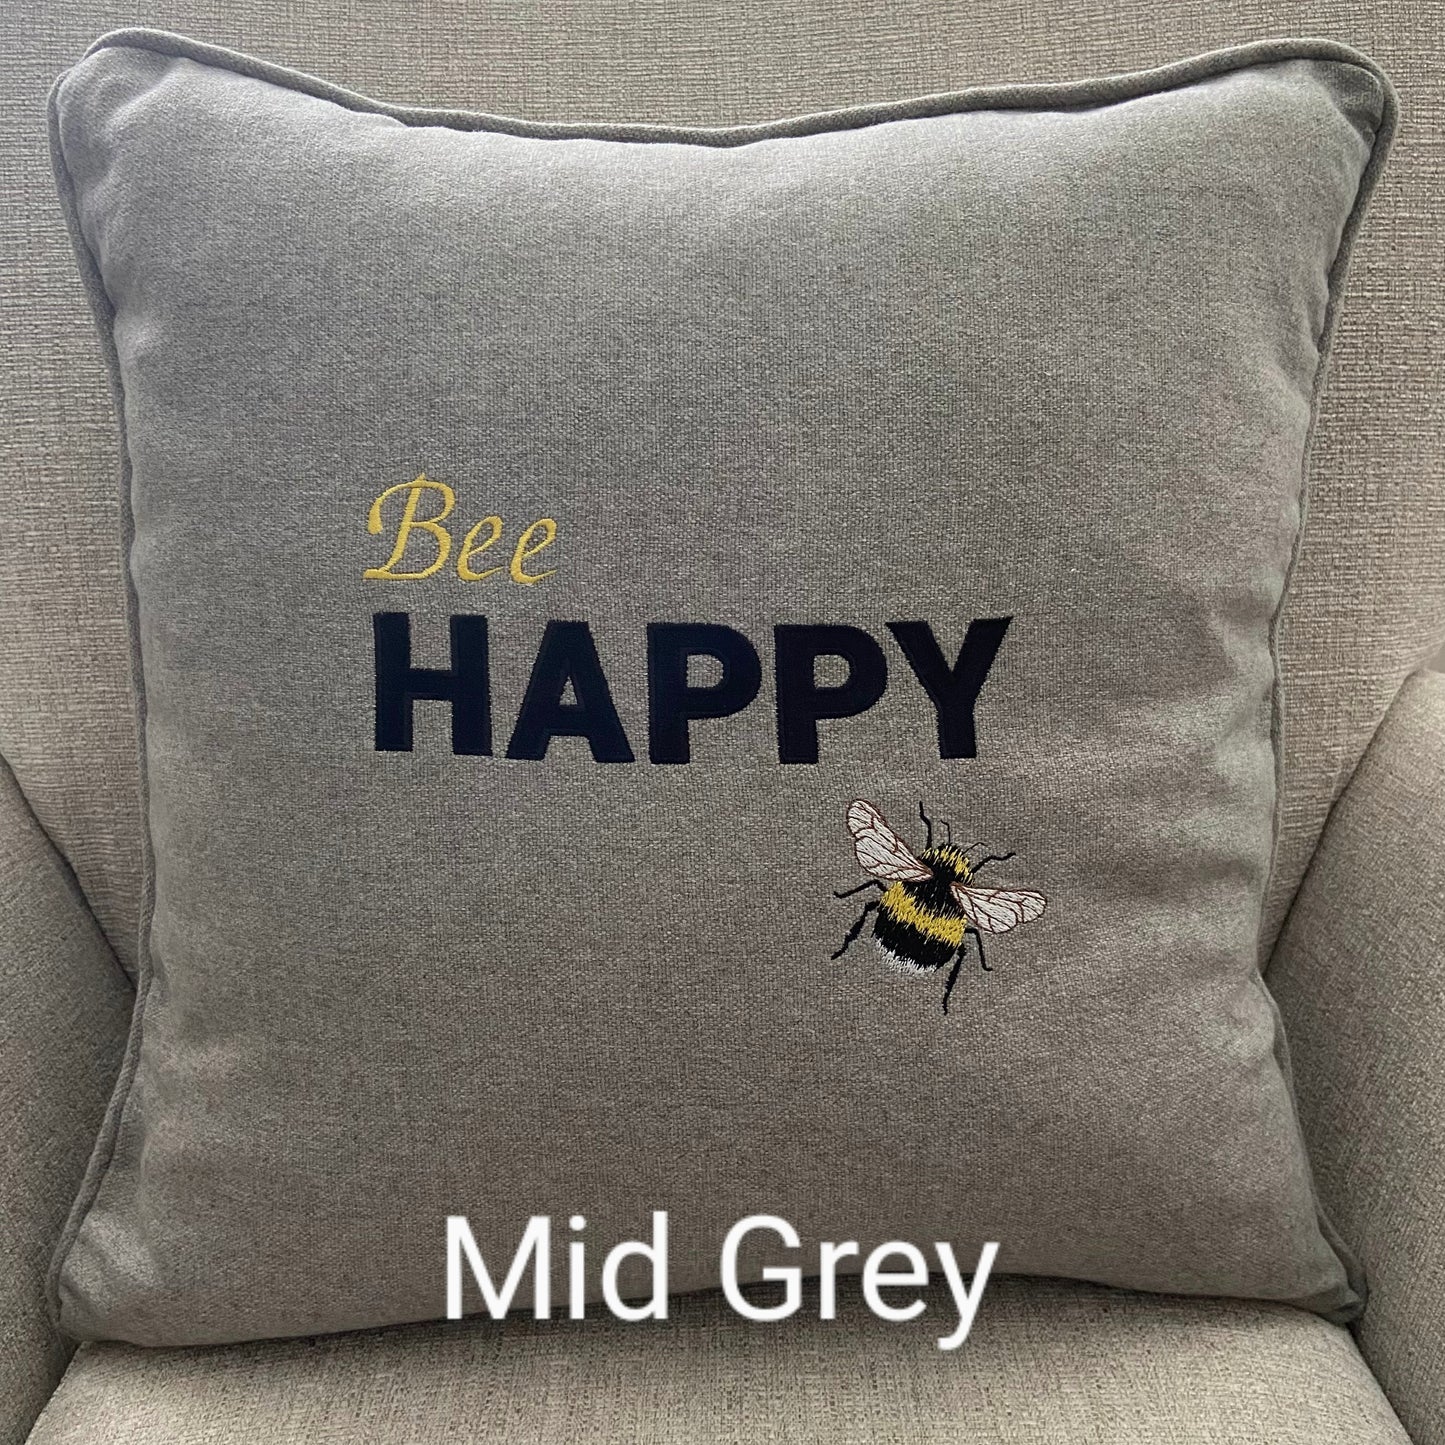 Bee Happy Embroidered Cushion Cover - 45cm x 45cm